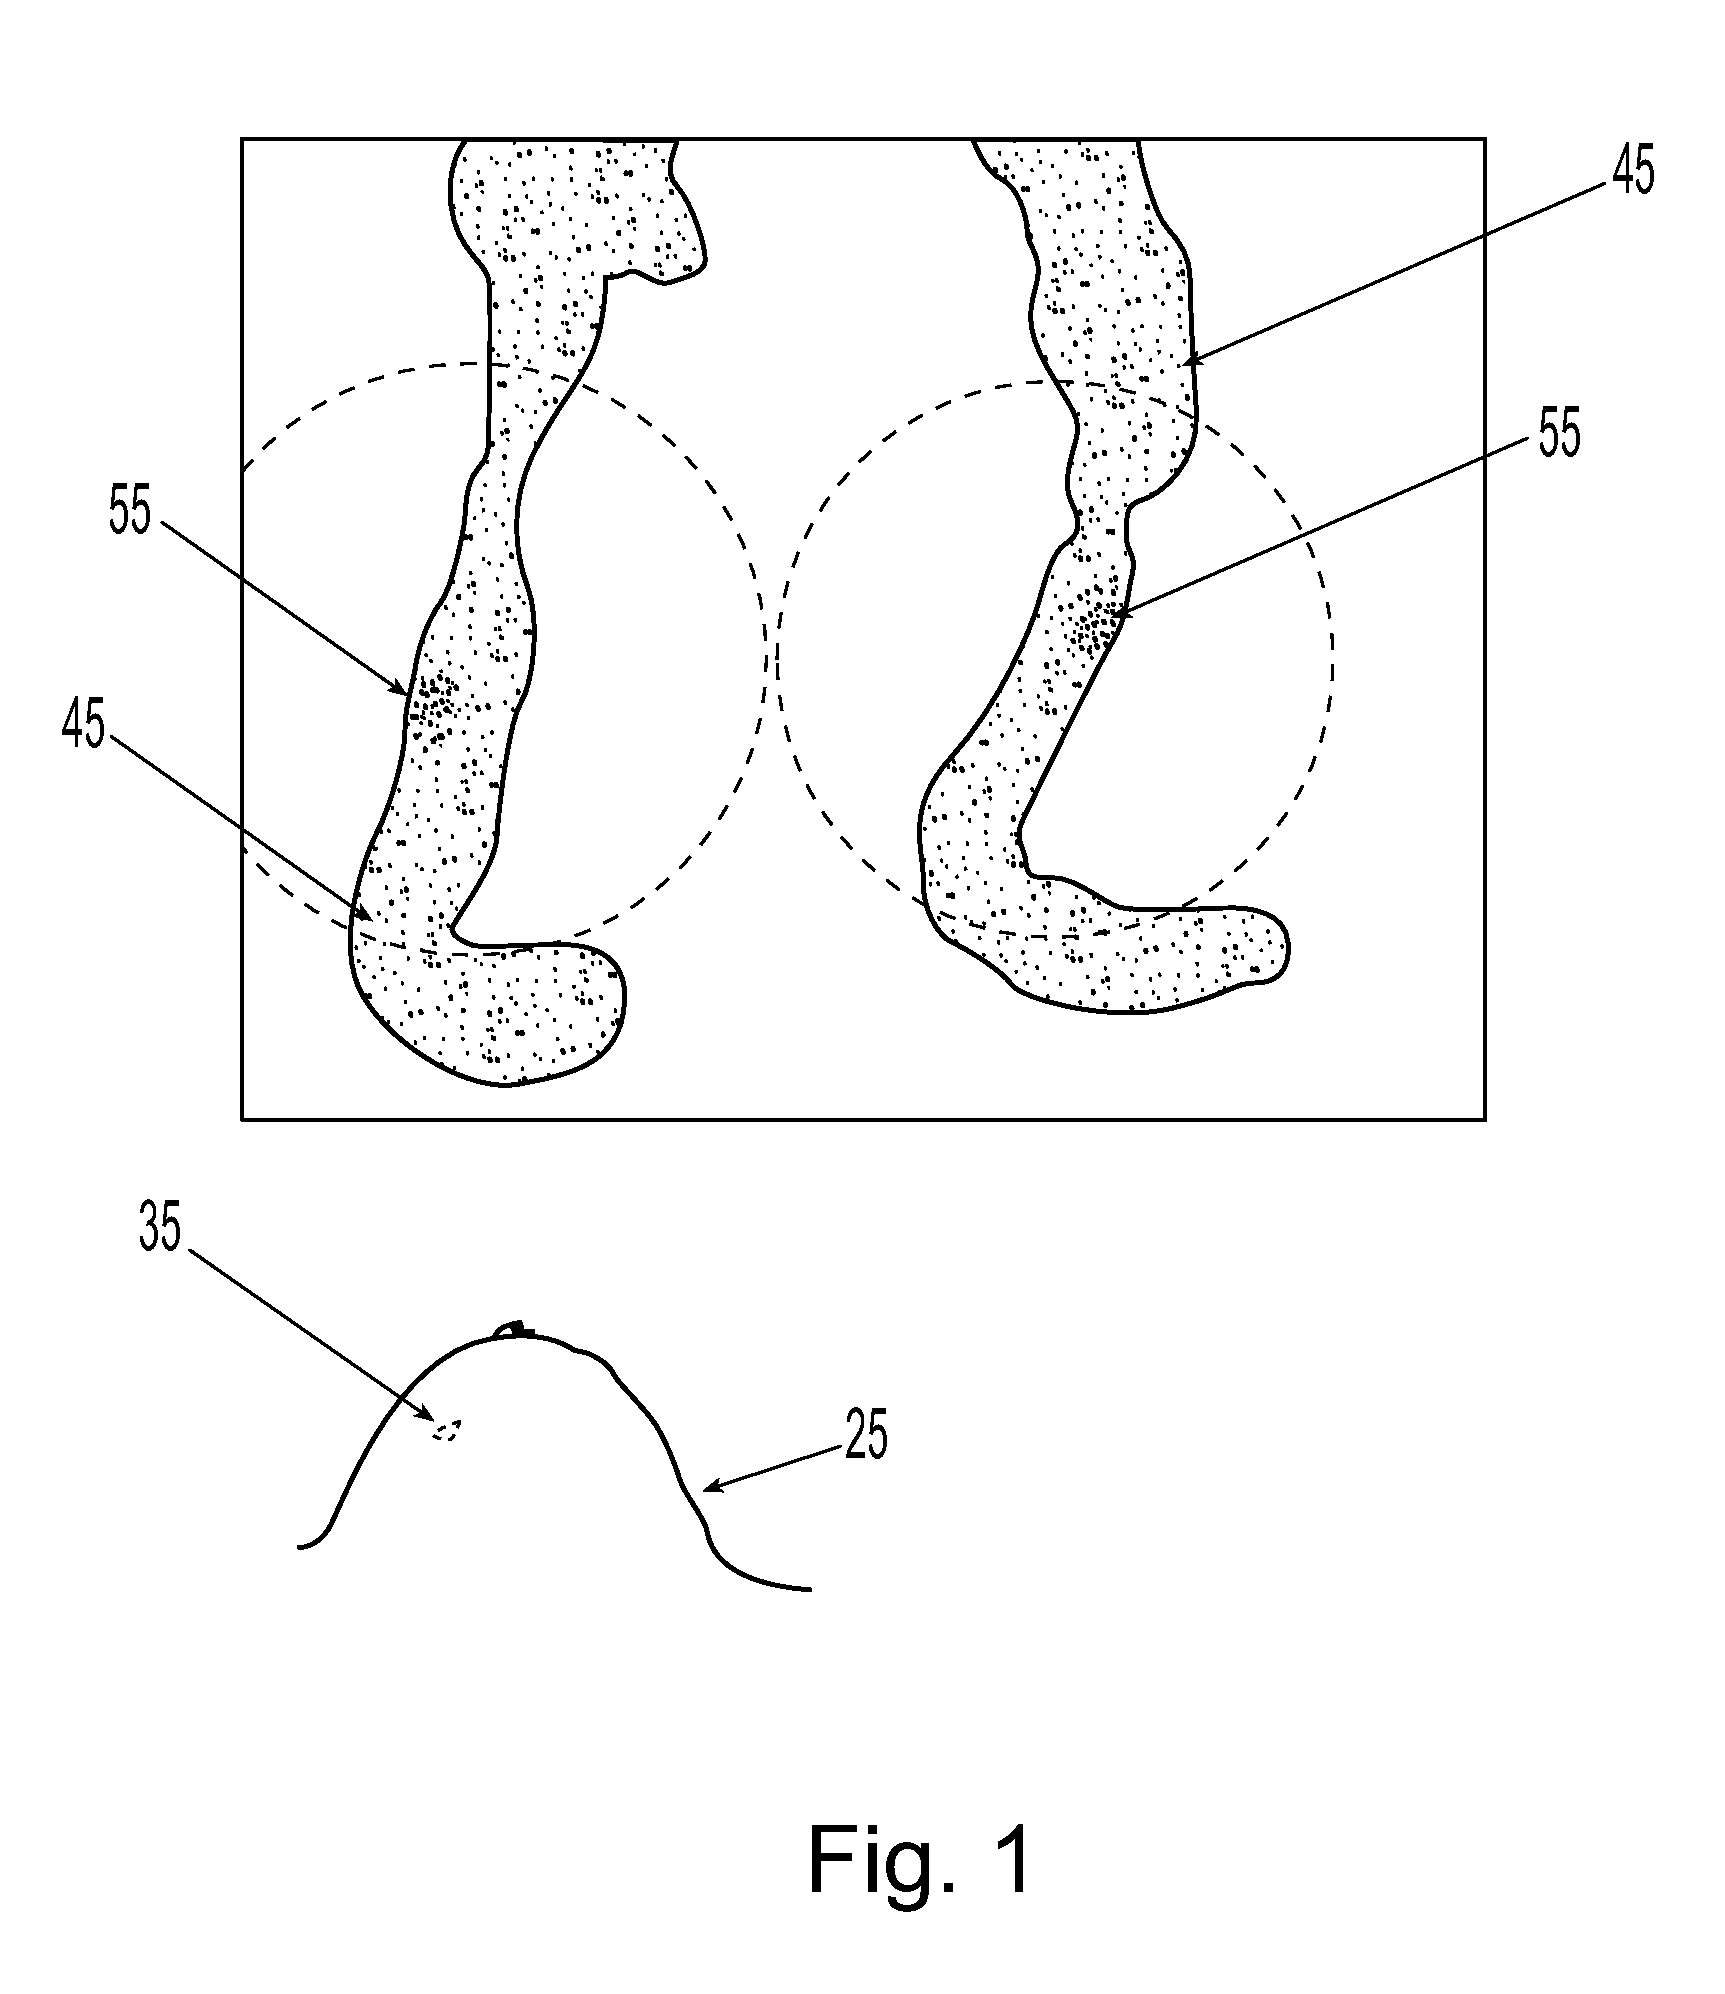 System and apparatus for rapid stereotactic breast biopsy analysis